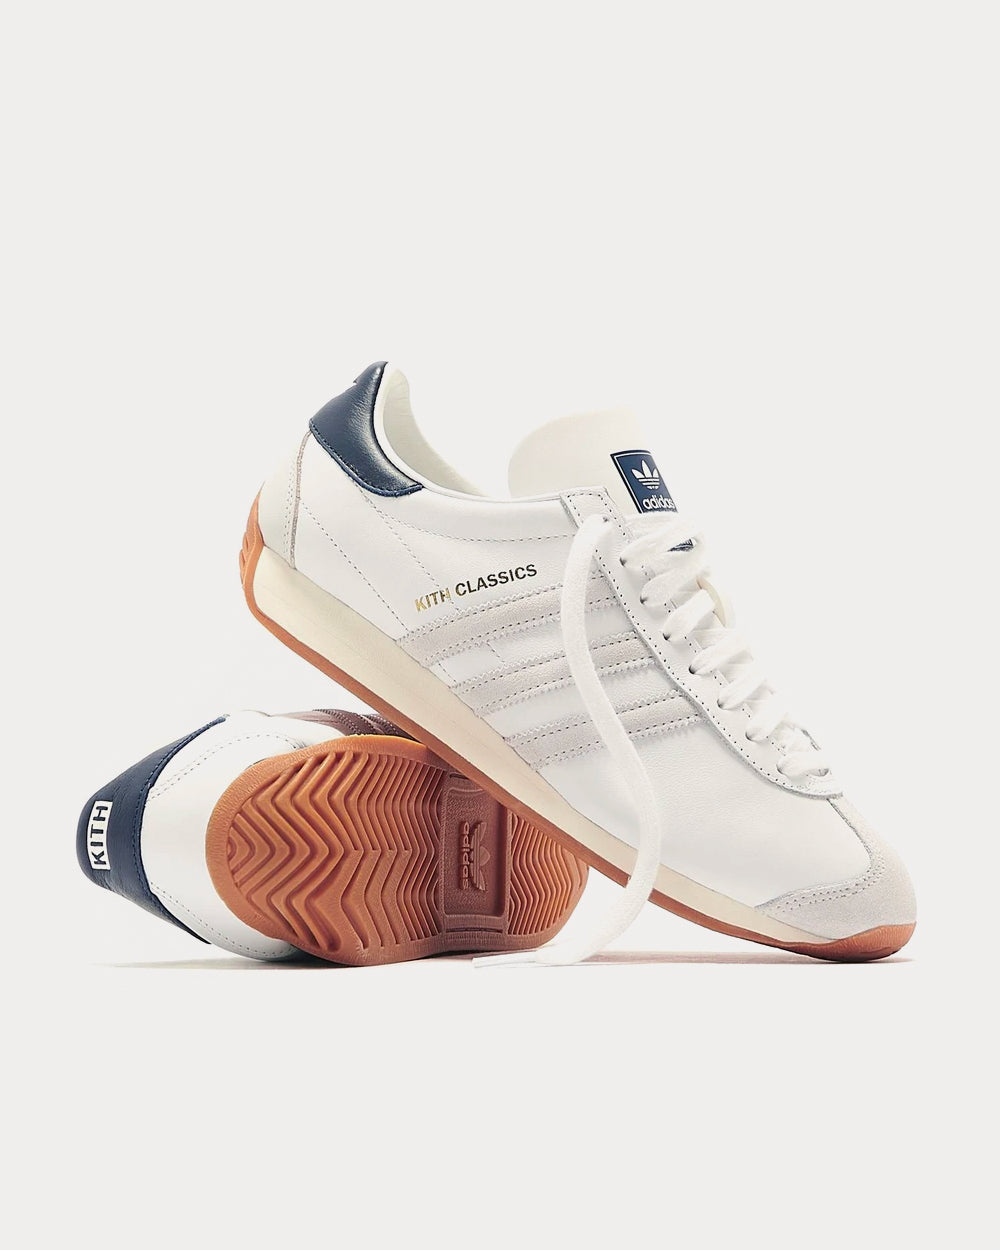 Adidas x Kith - Classics Program Country White / Collegiate Blue / Gold Low Top Sneakers